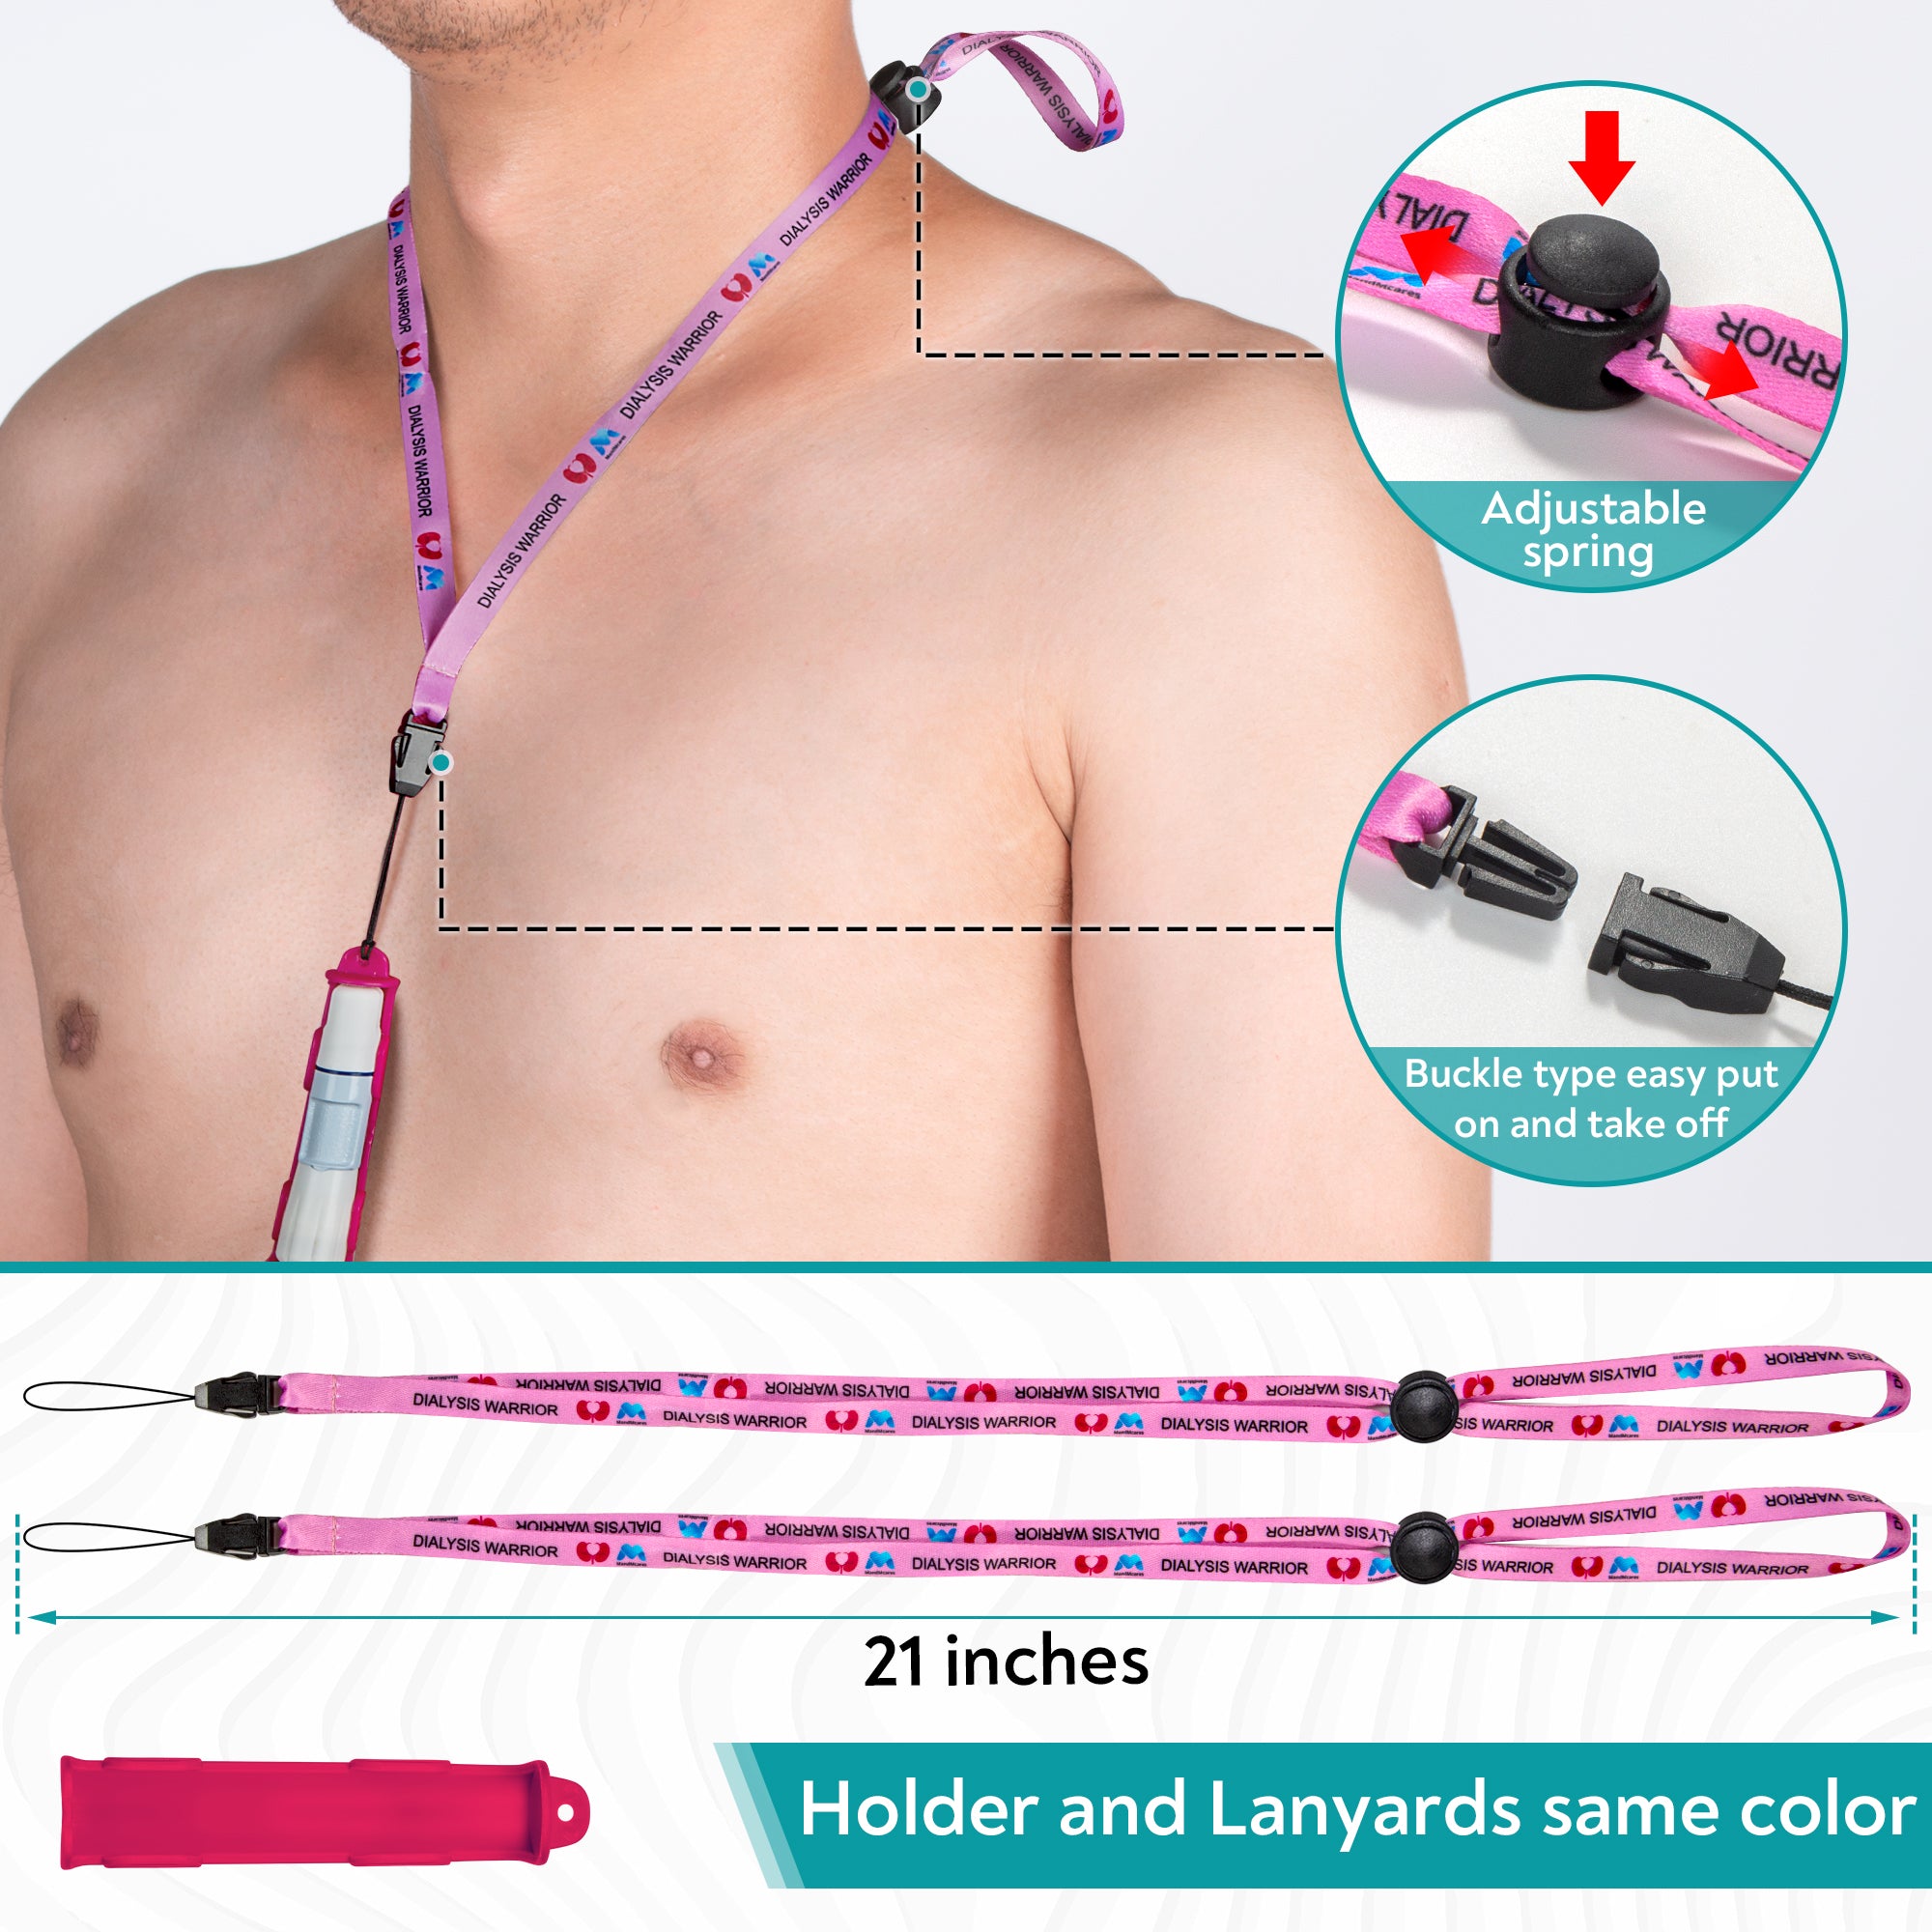 Peritoneal Dialysis Transfer Set Holder for Baxter | 2 Spring Adjustable Lanyard Included